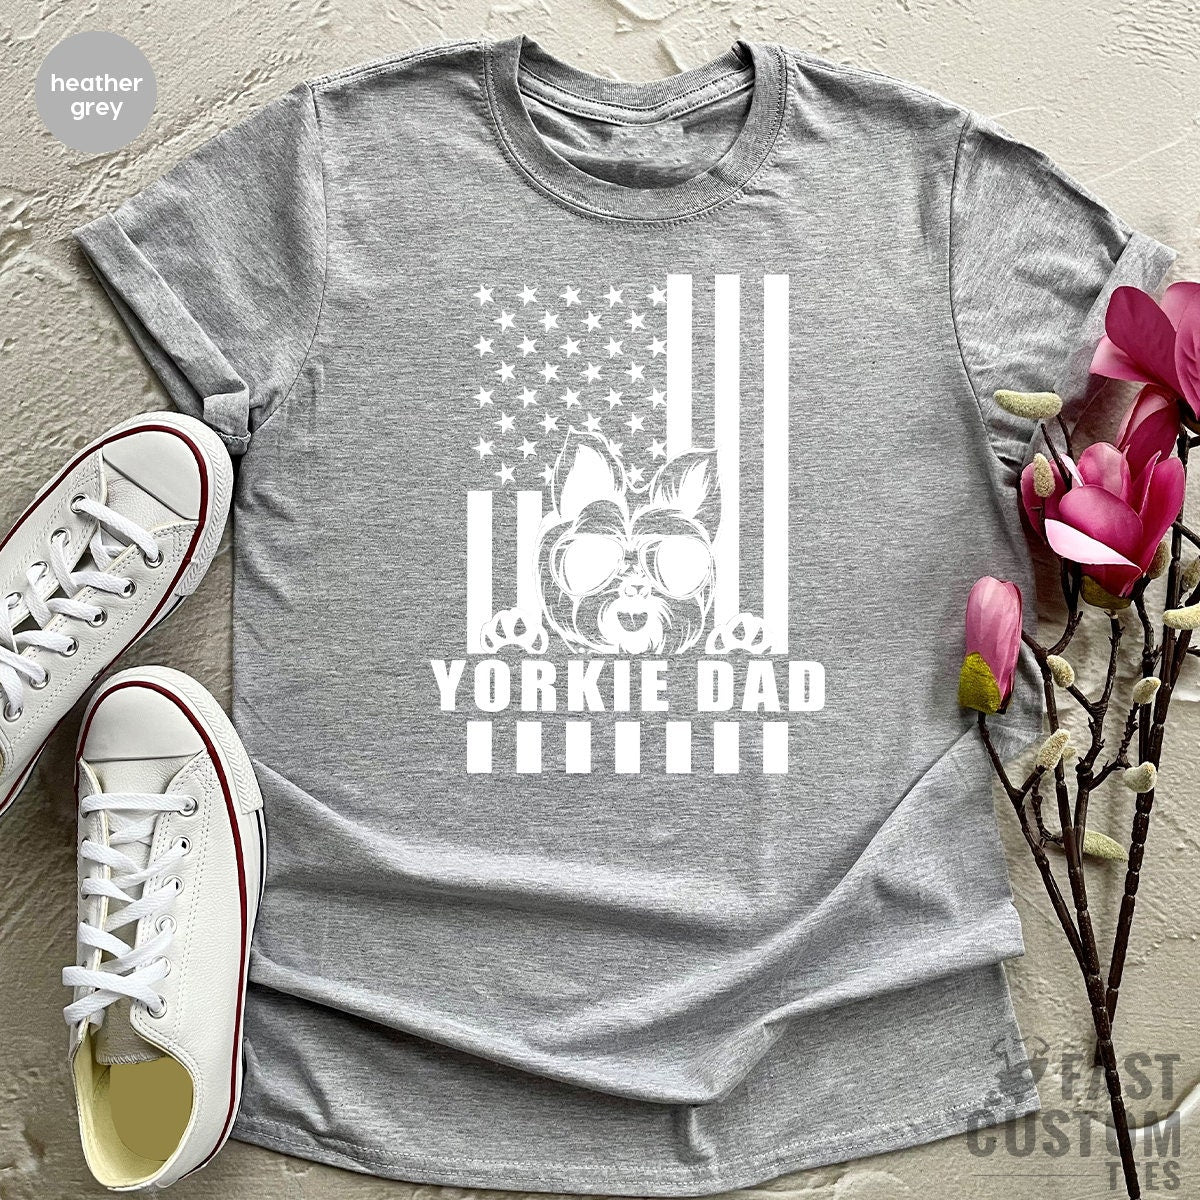 Yorkie Dad Shirt, American Flag With Yorkie, Gift For Pet Dad, Dog Dad Shirt, Yorkie Lover Gift, Best Yorkie Dad Ever Shirt, Yorkie Dad Tee - Fastdeliverytees.com